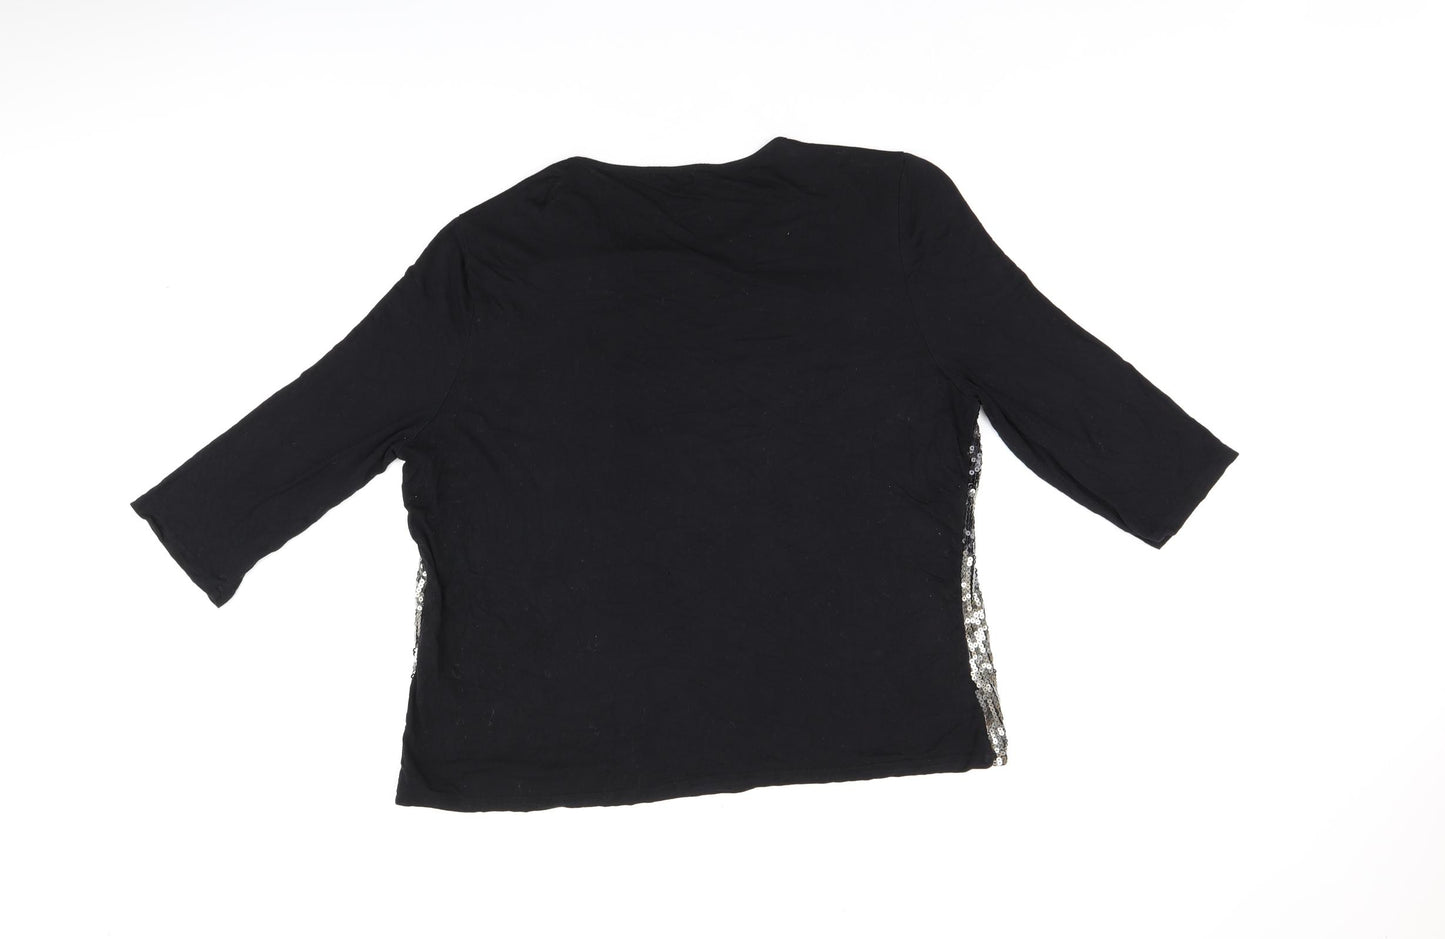 CASAMIA Womens Black Polyester Basic T-Shirt Size L Round Neck - Sequin Detail